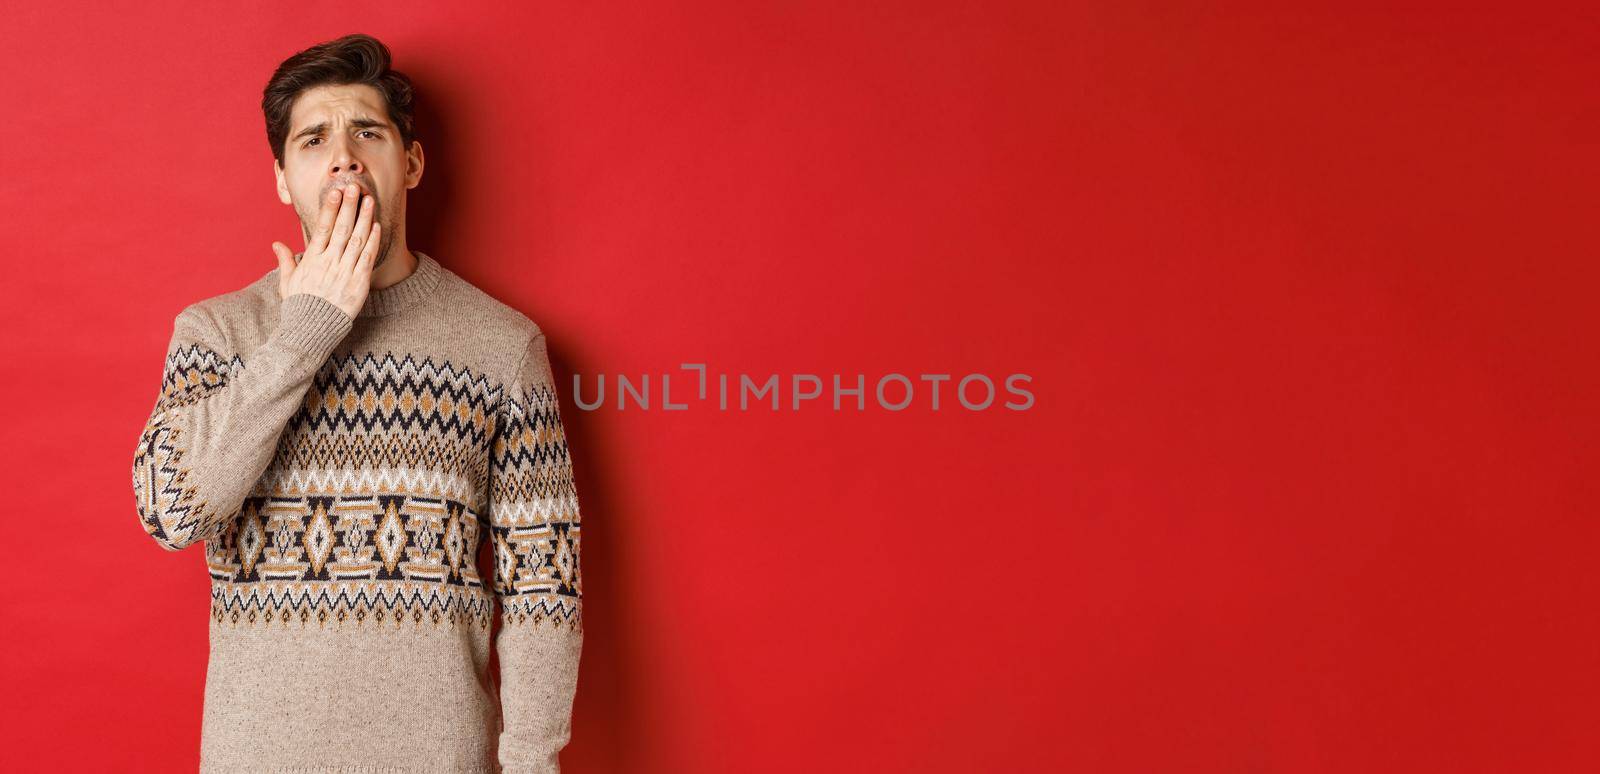 Image of tired or bored handsome man in winter sweater, yawning and covering mouth with hand, standing exhausted against red background.